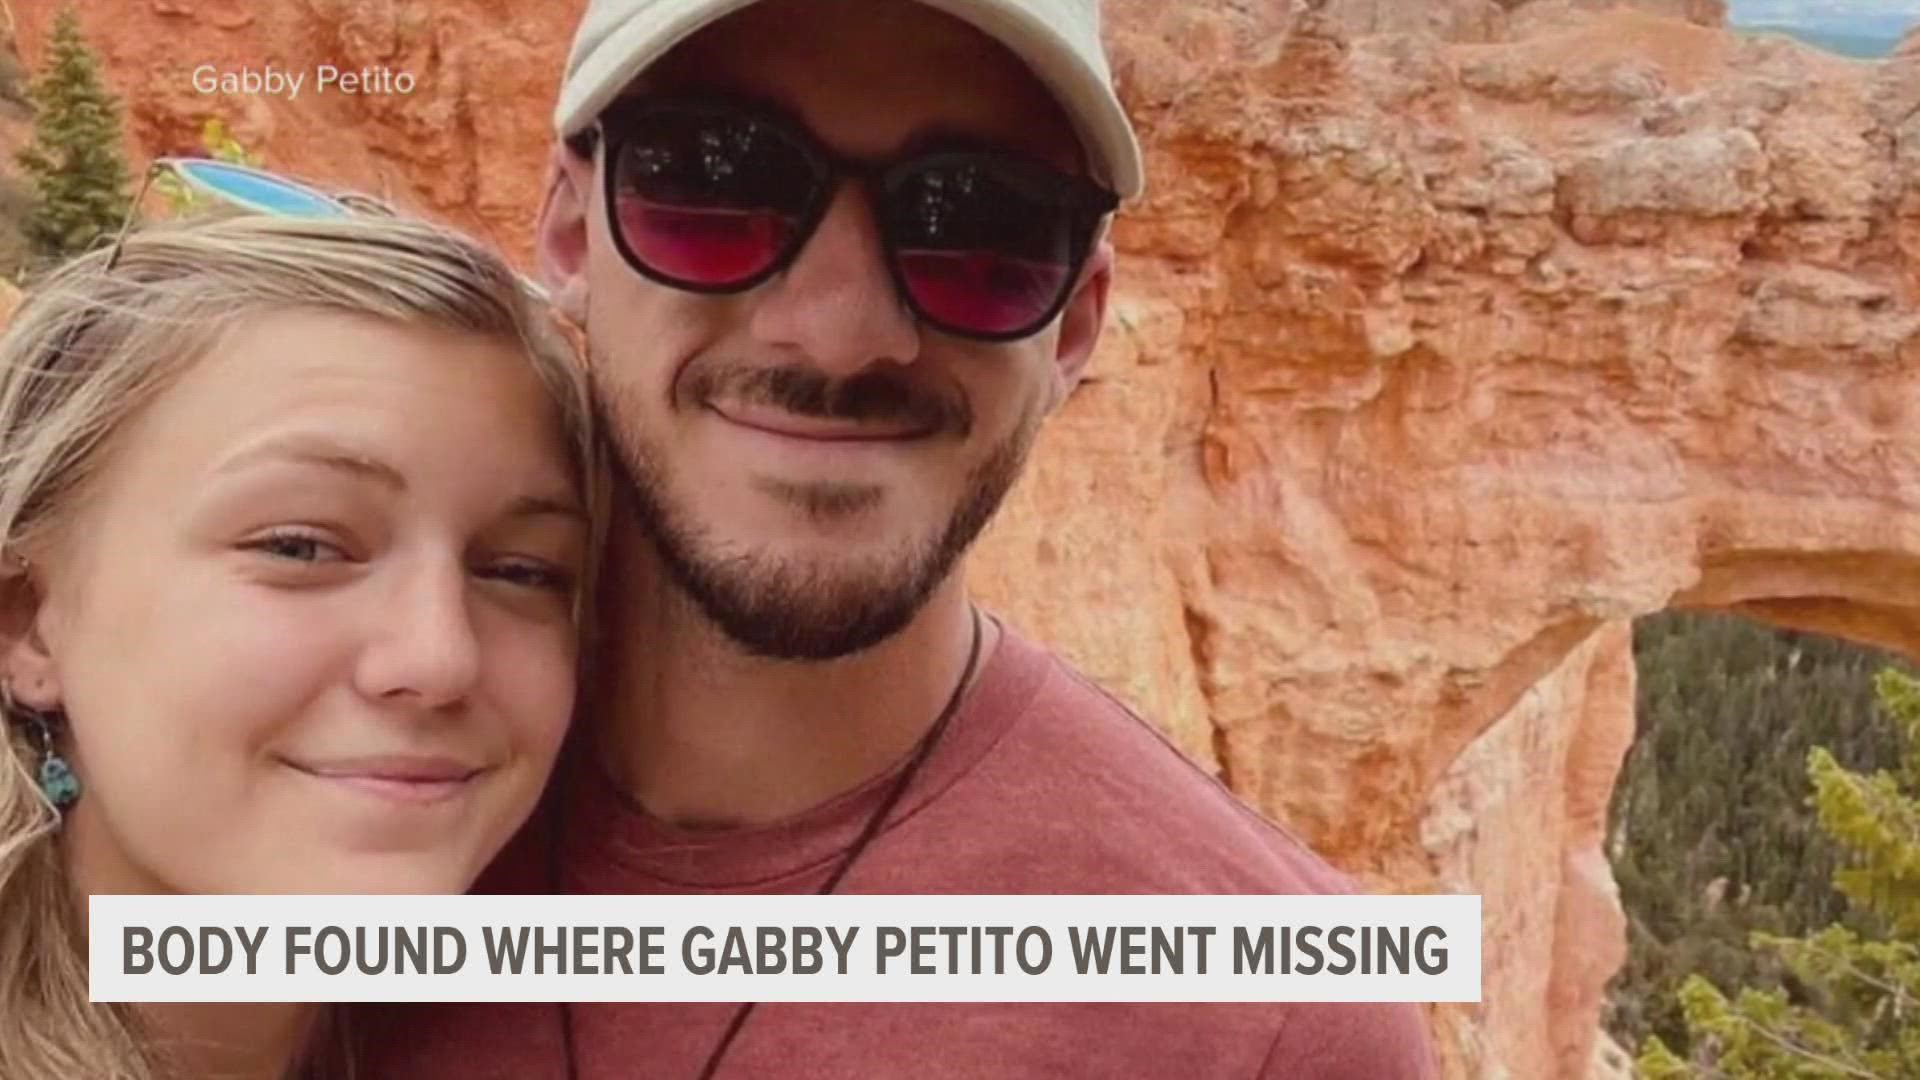 Gabby Petito vanished during a cross-country road trip with fiancé Brian Laundrie, who is considered a "person of interest" in the case.